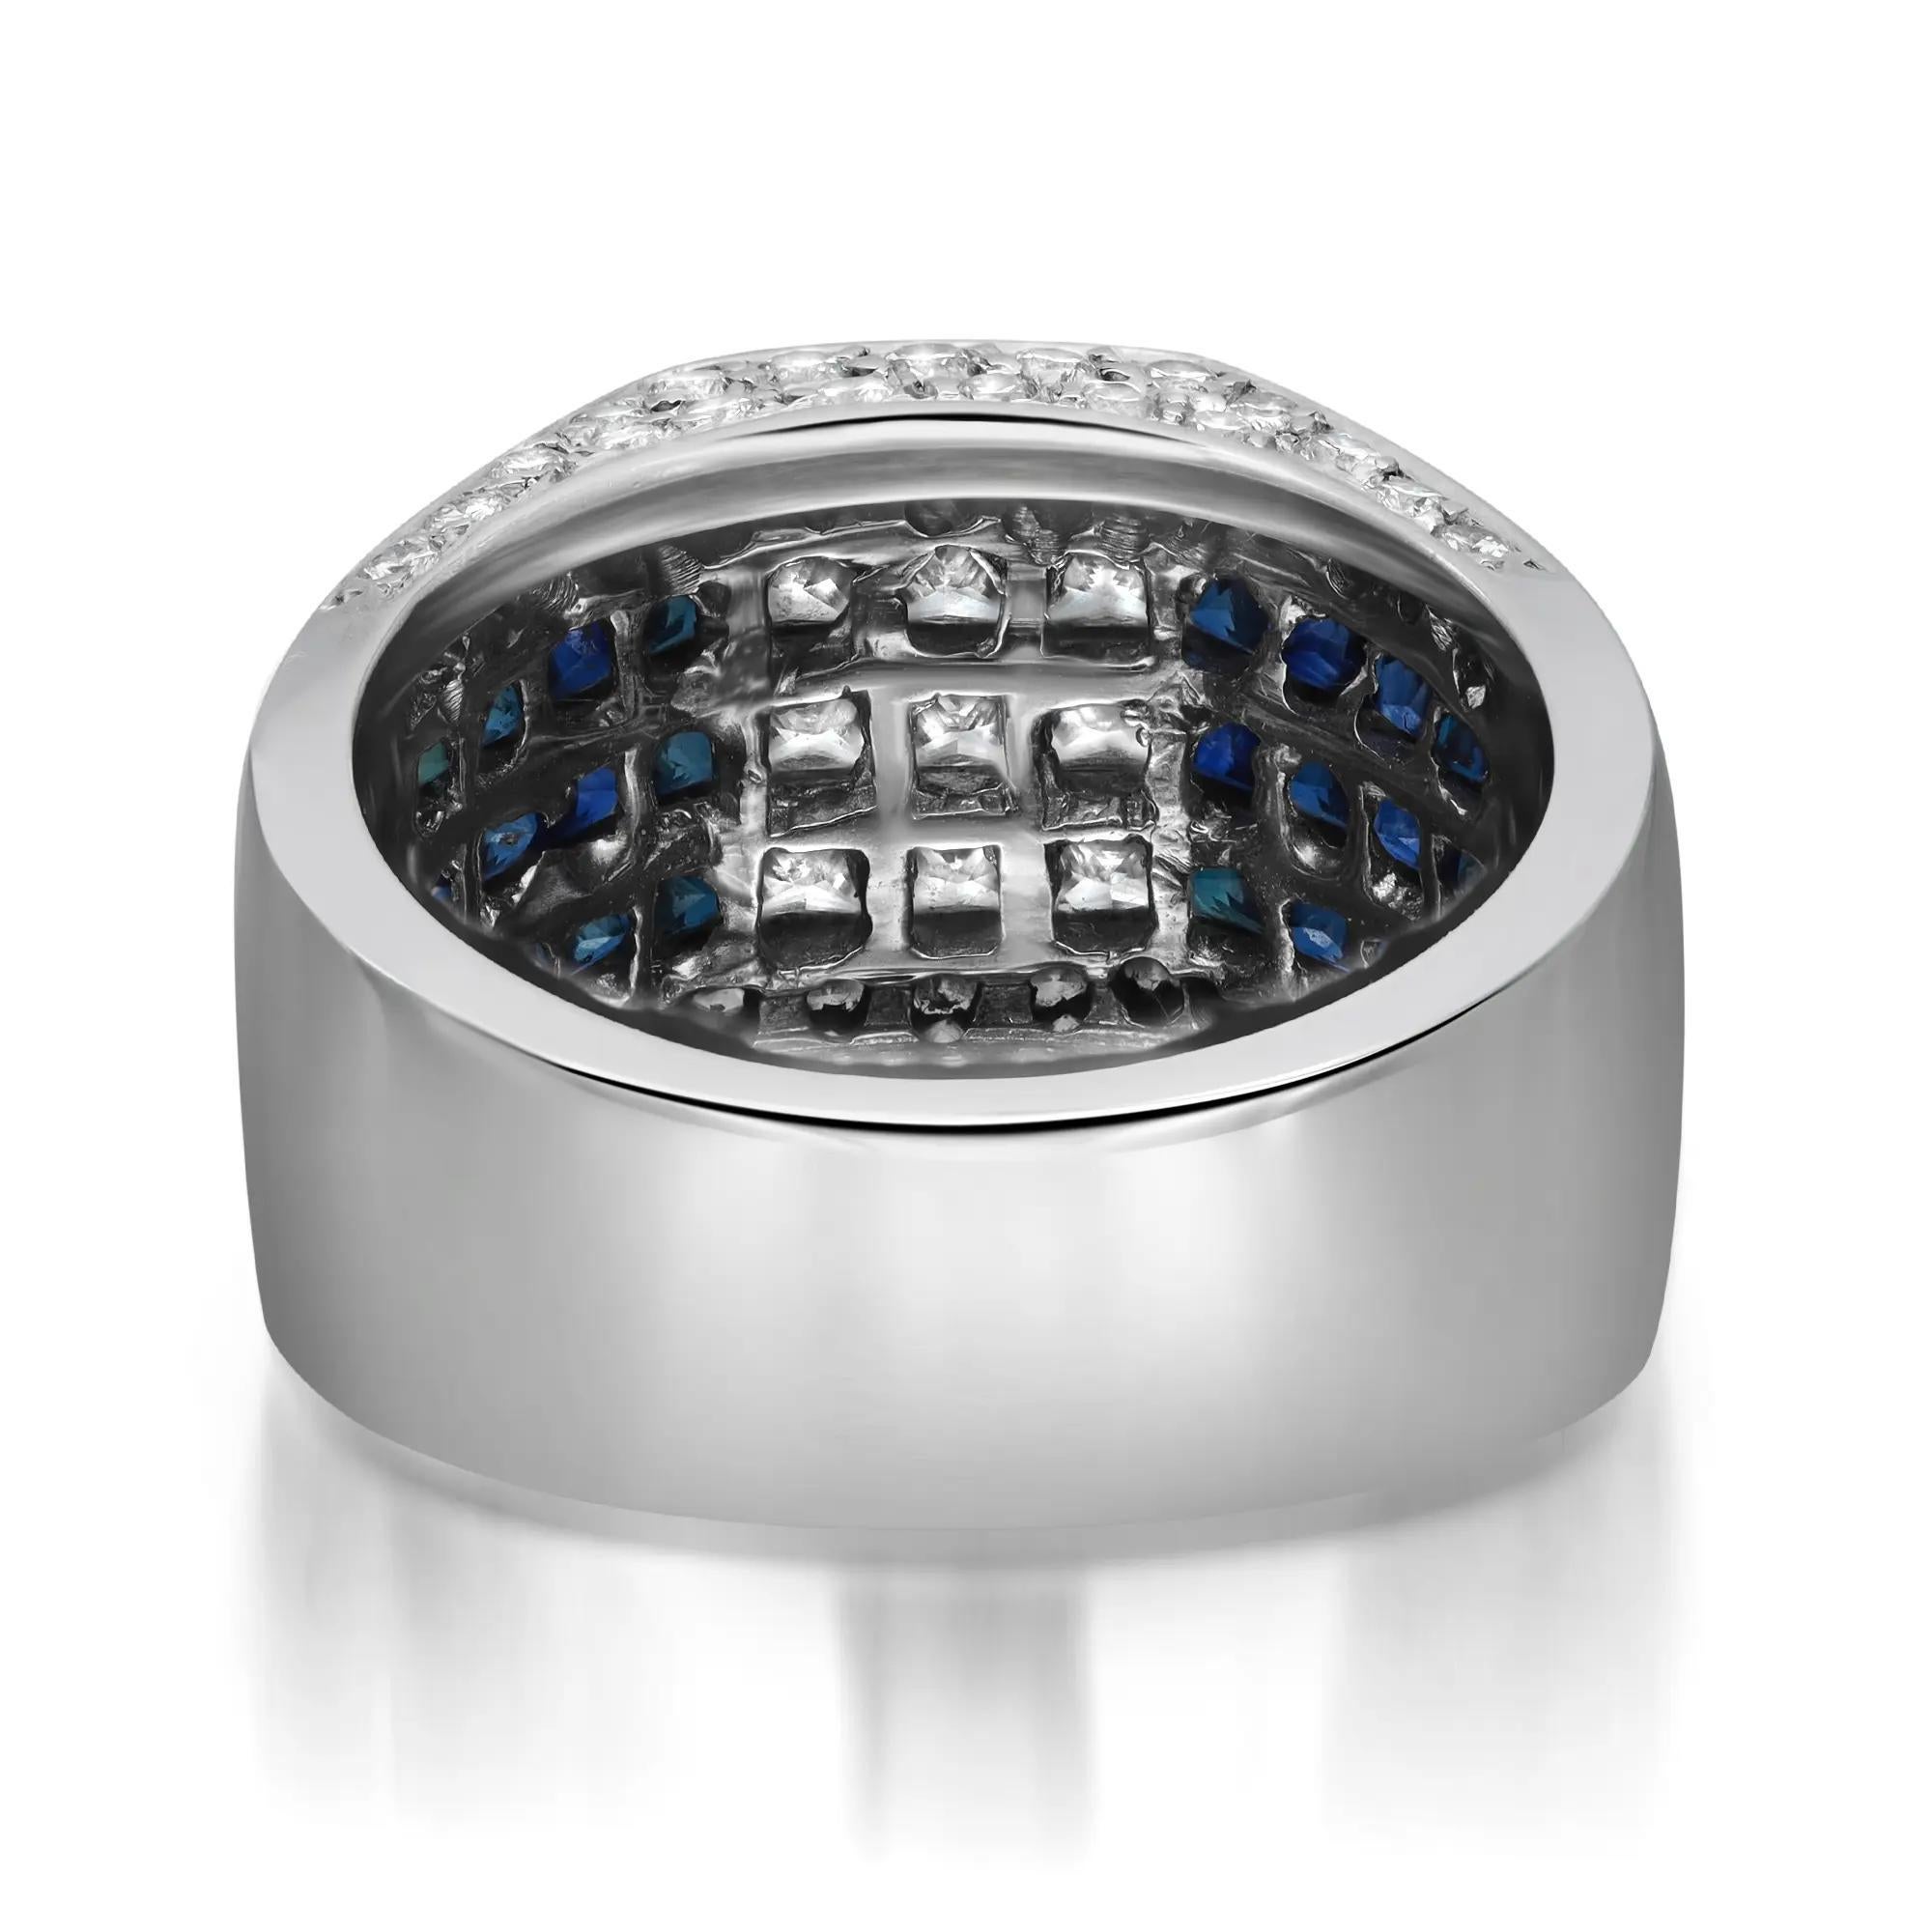 This bold and dramatic cocktail band ring features channel set dazzling princess cut diamonds in the center with channel set princess cut blue sapphires on both sides. Accented with pave set round brilliant cut diamonds on the edges which enhances